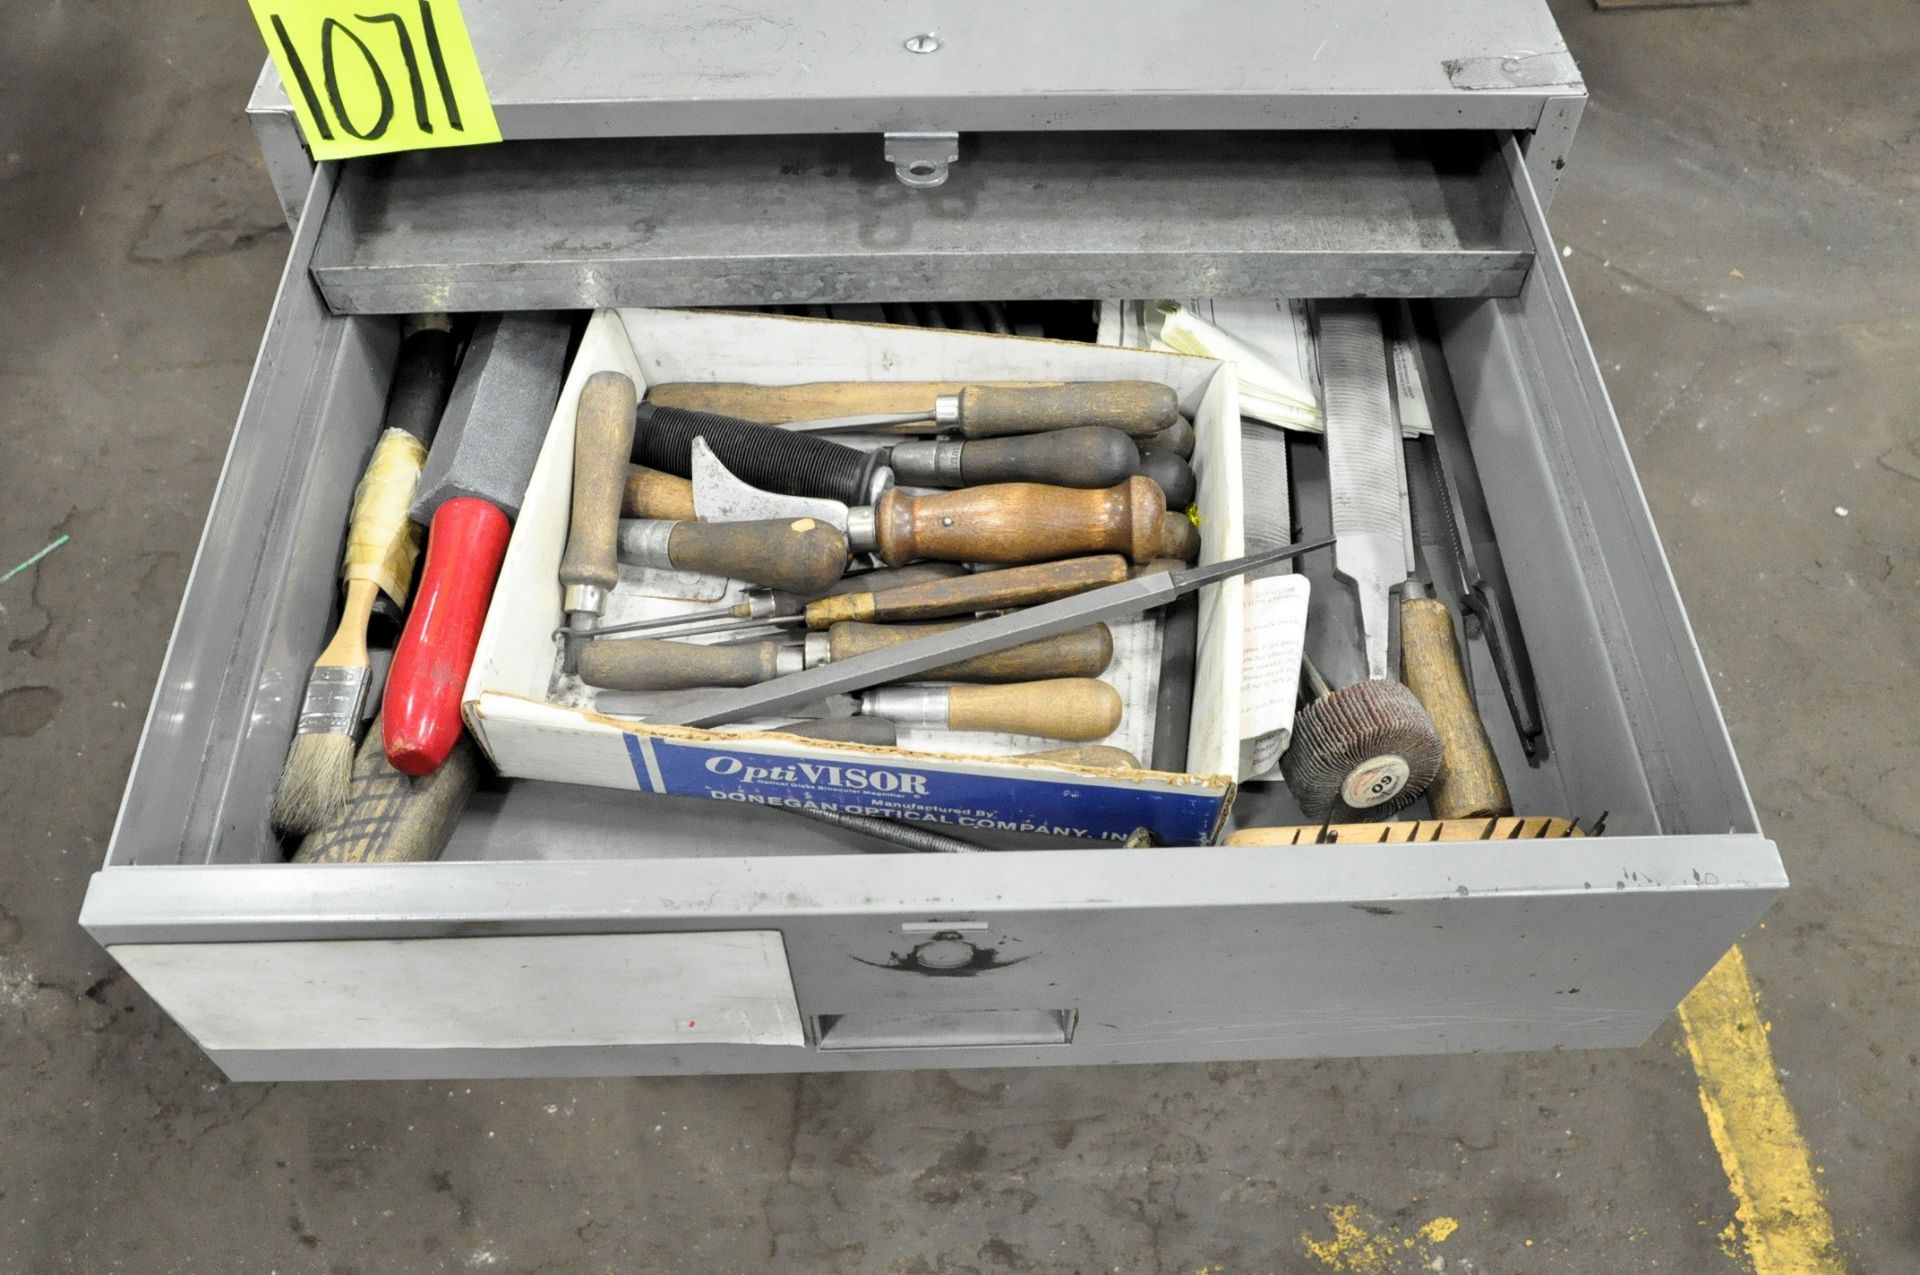 4-Drawer Rolling Cabinet with Misc. Tools Contents, (E-7), (Yellow Tag) - Image 2 of 5